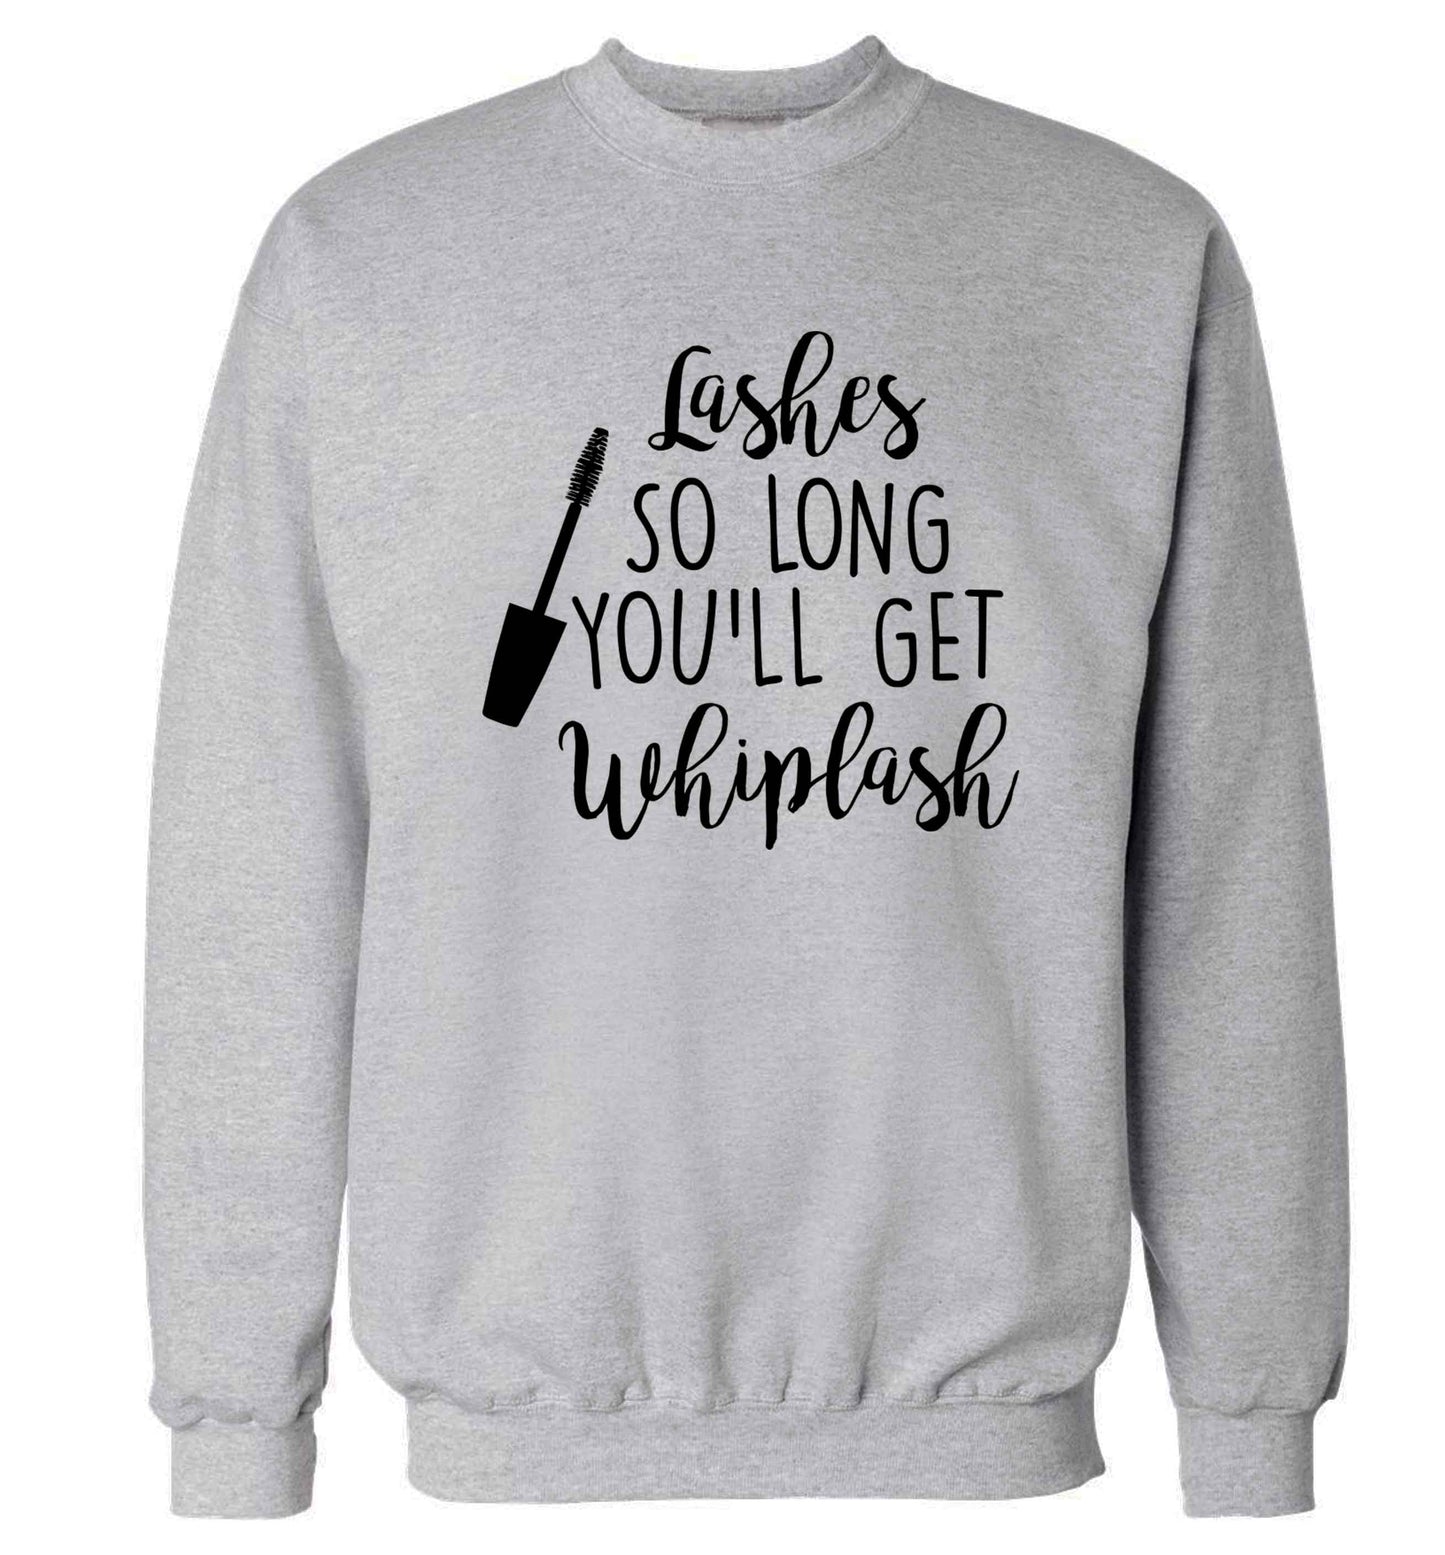 Lashes so long you'll get whiplash Adult's unisex grey Sweater 2XL